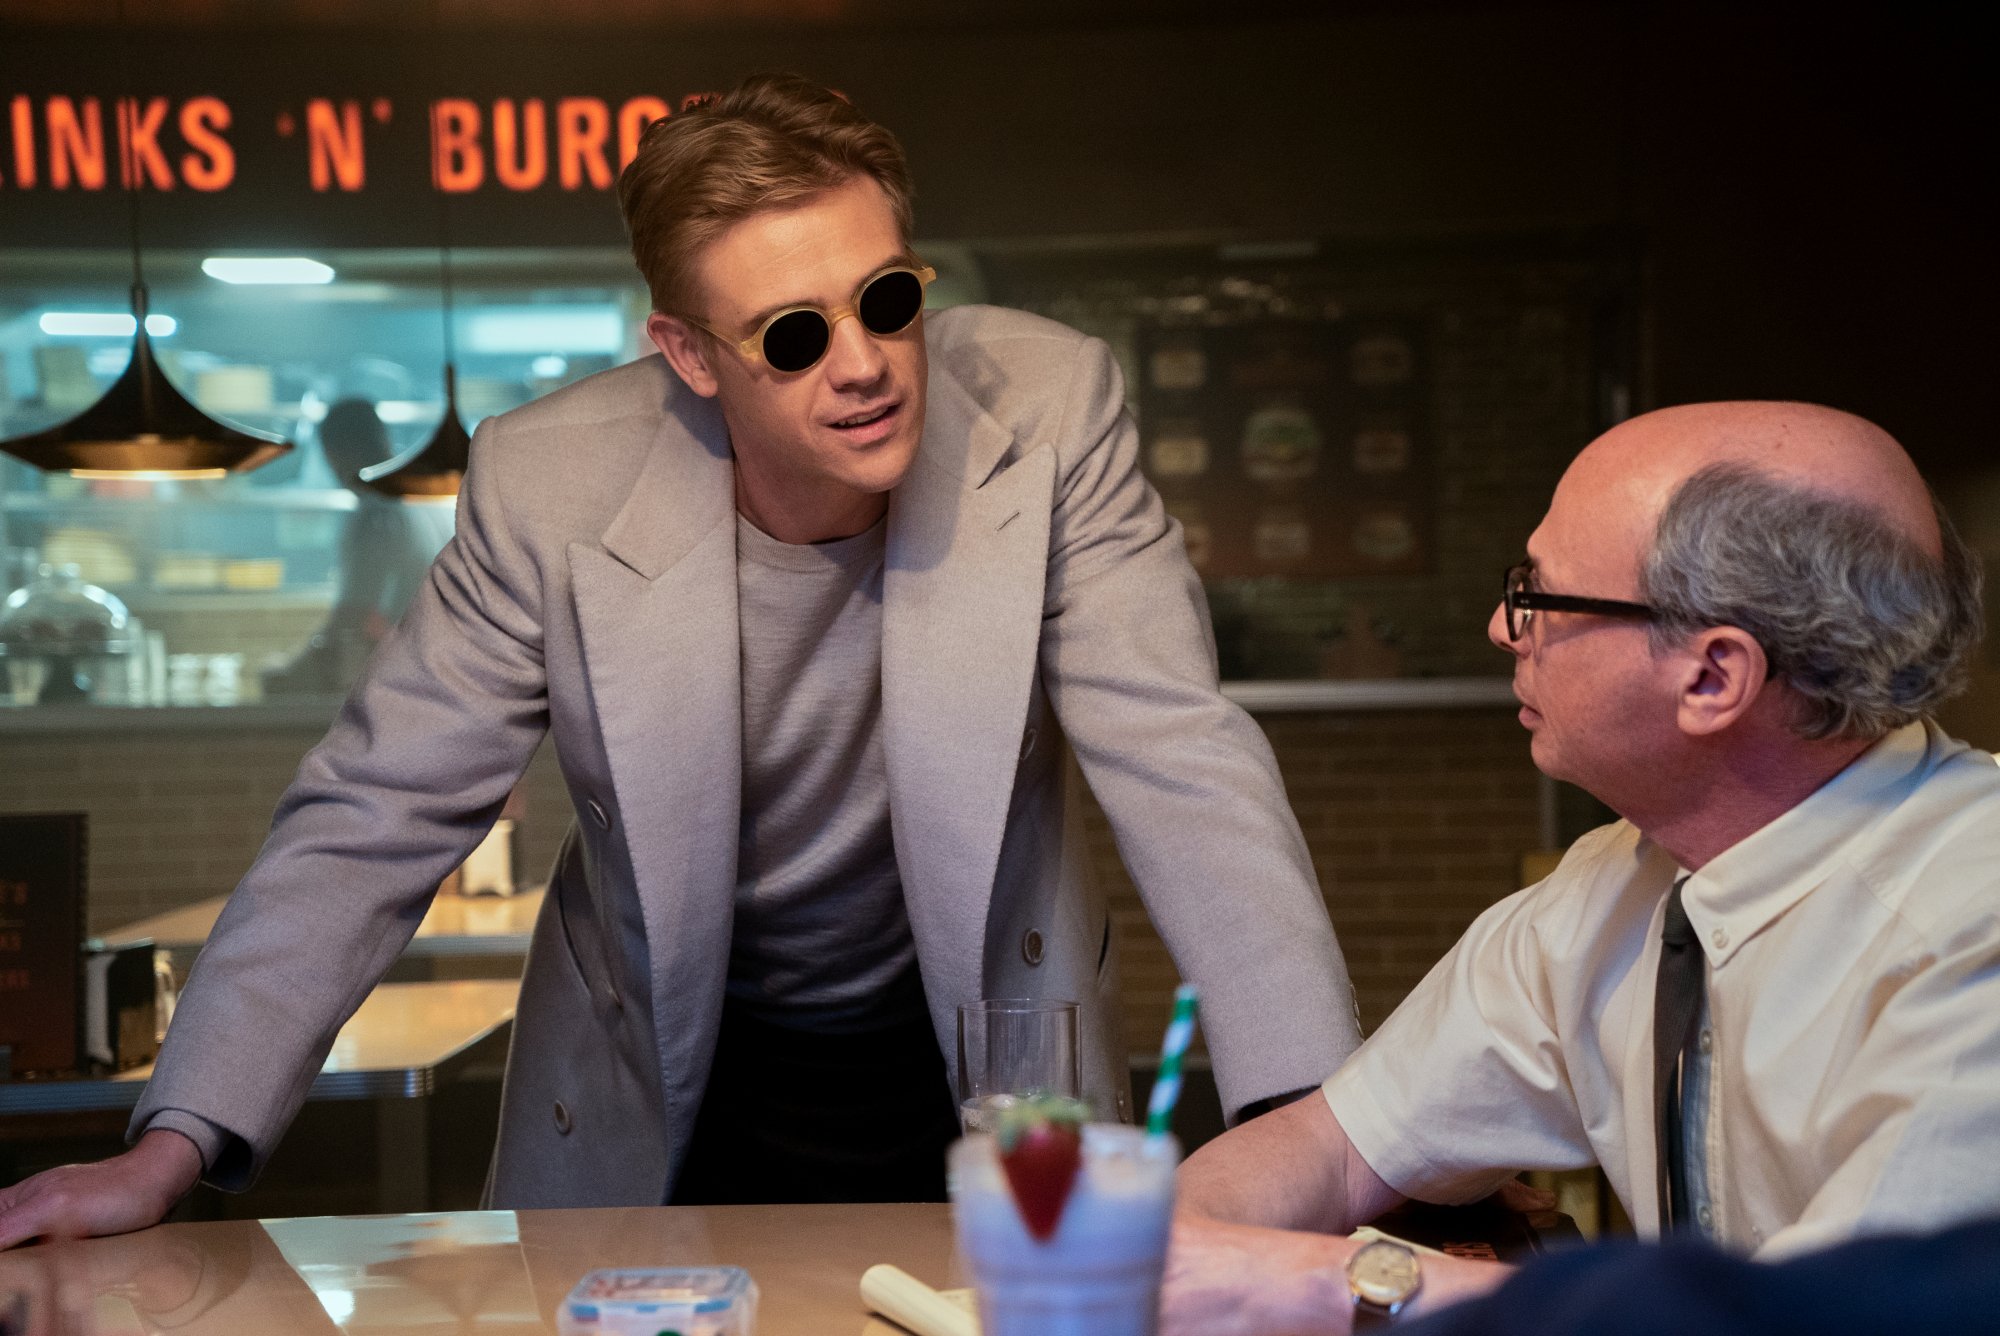 A man in sunglasses rests his hands on a diner table, talking to another man at the table.